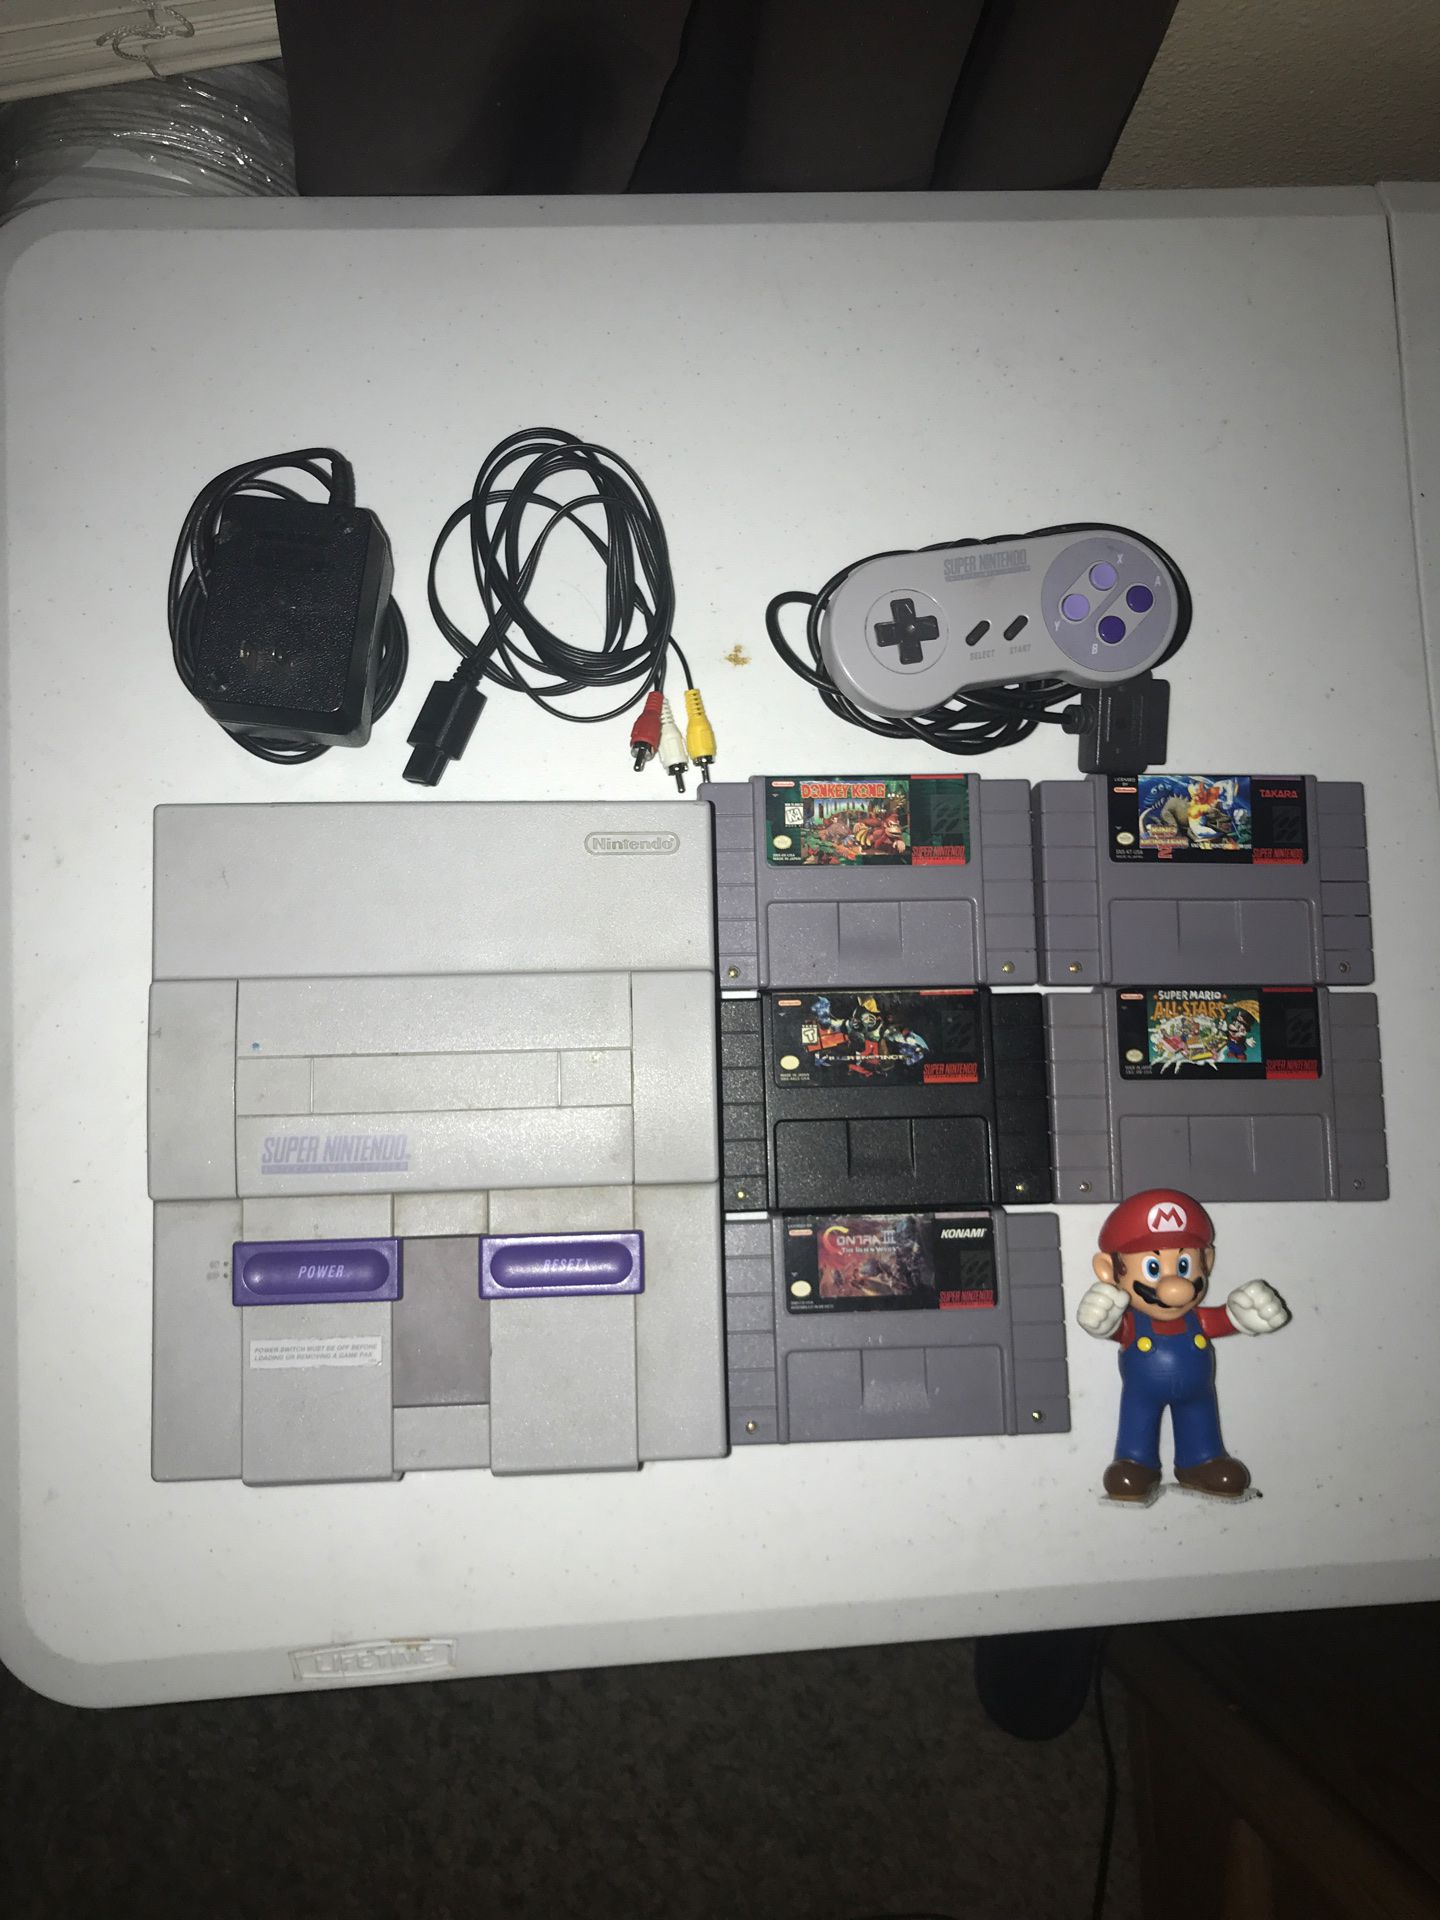 Super Nintendo Bundle with cables, 1 controller, and 5 Games (Mario, Donkey Kong, Contra)